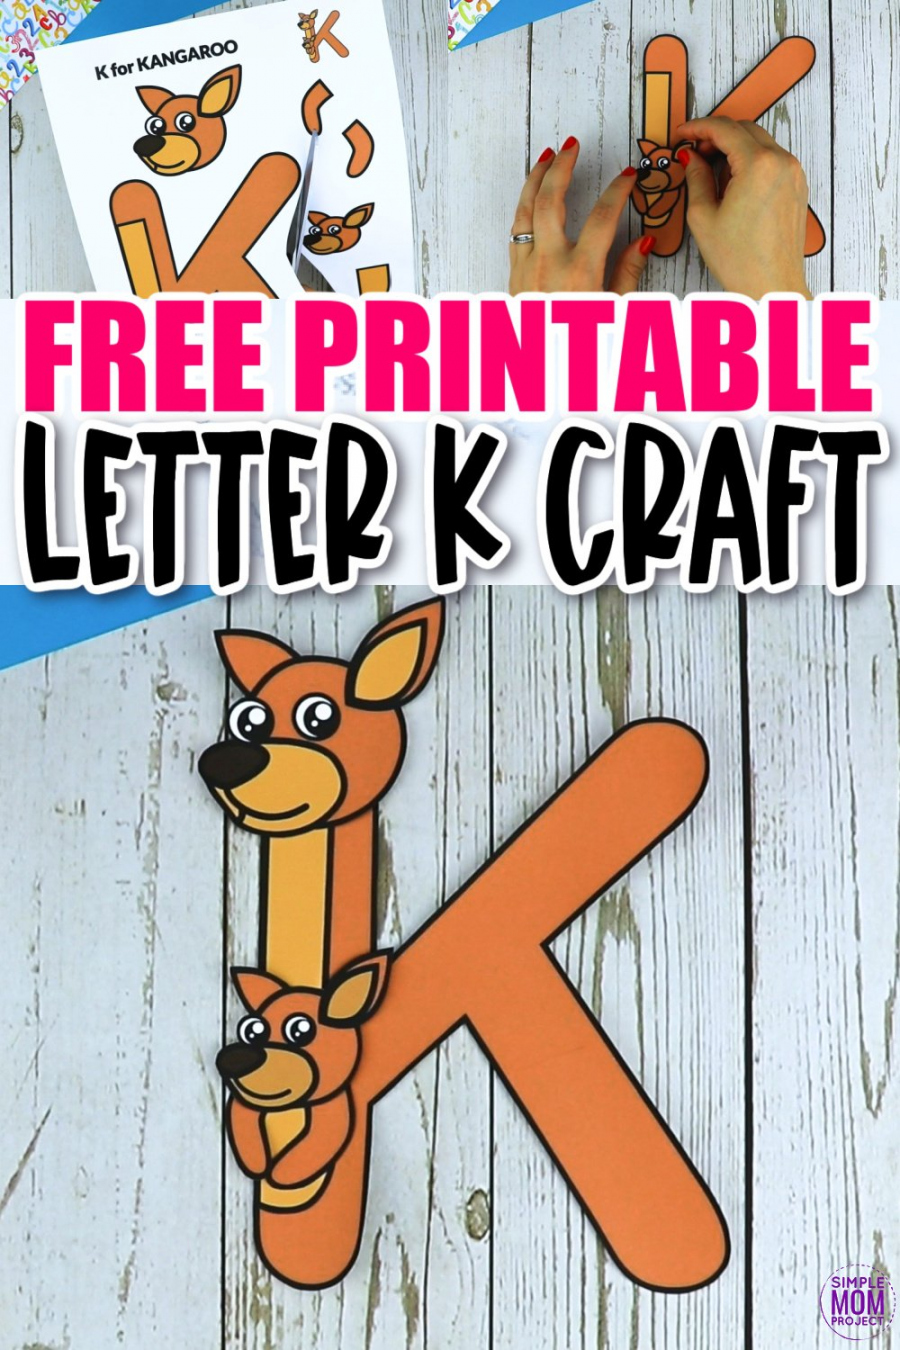 Free Printable Letter K Craft Template - Simple Mom Project - FREE Printables - Free Printable Letter K Crafts